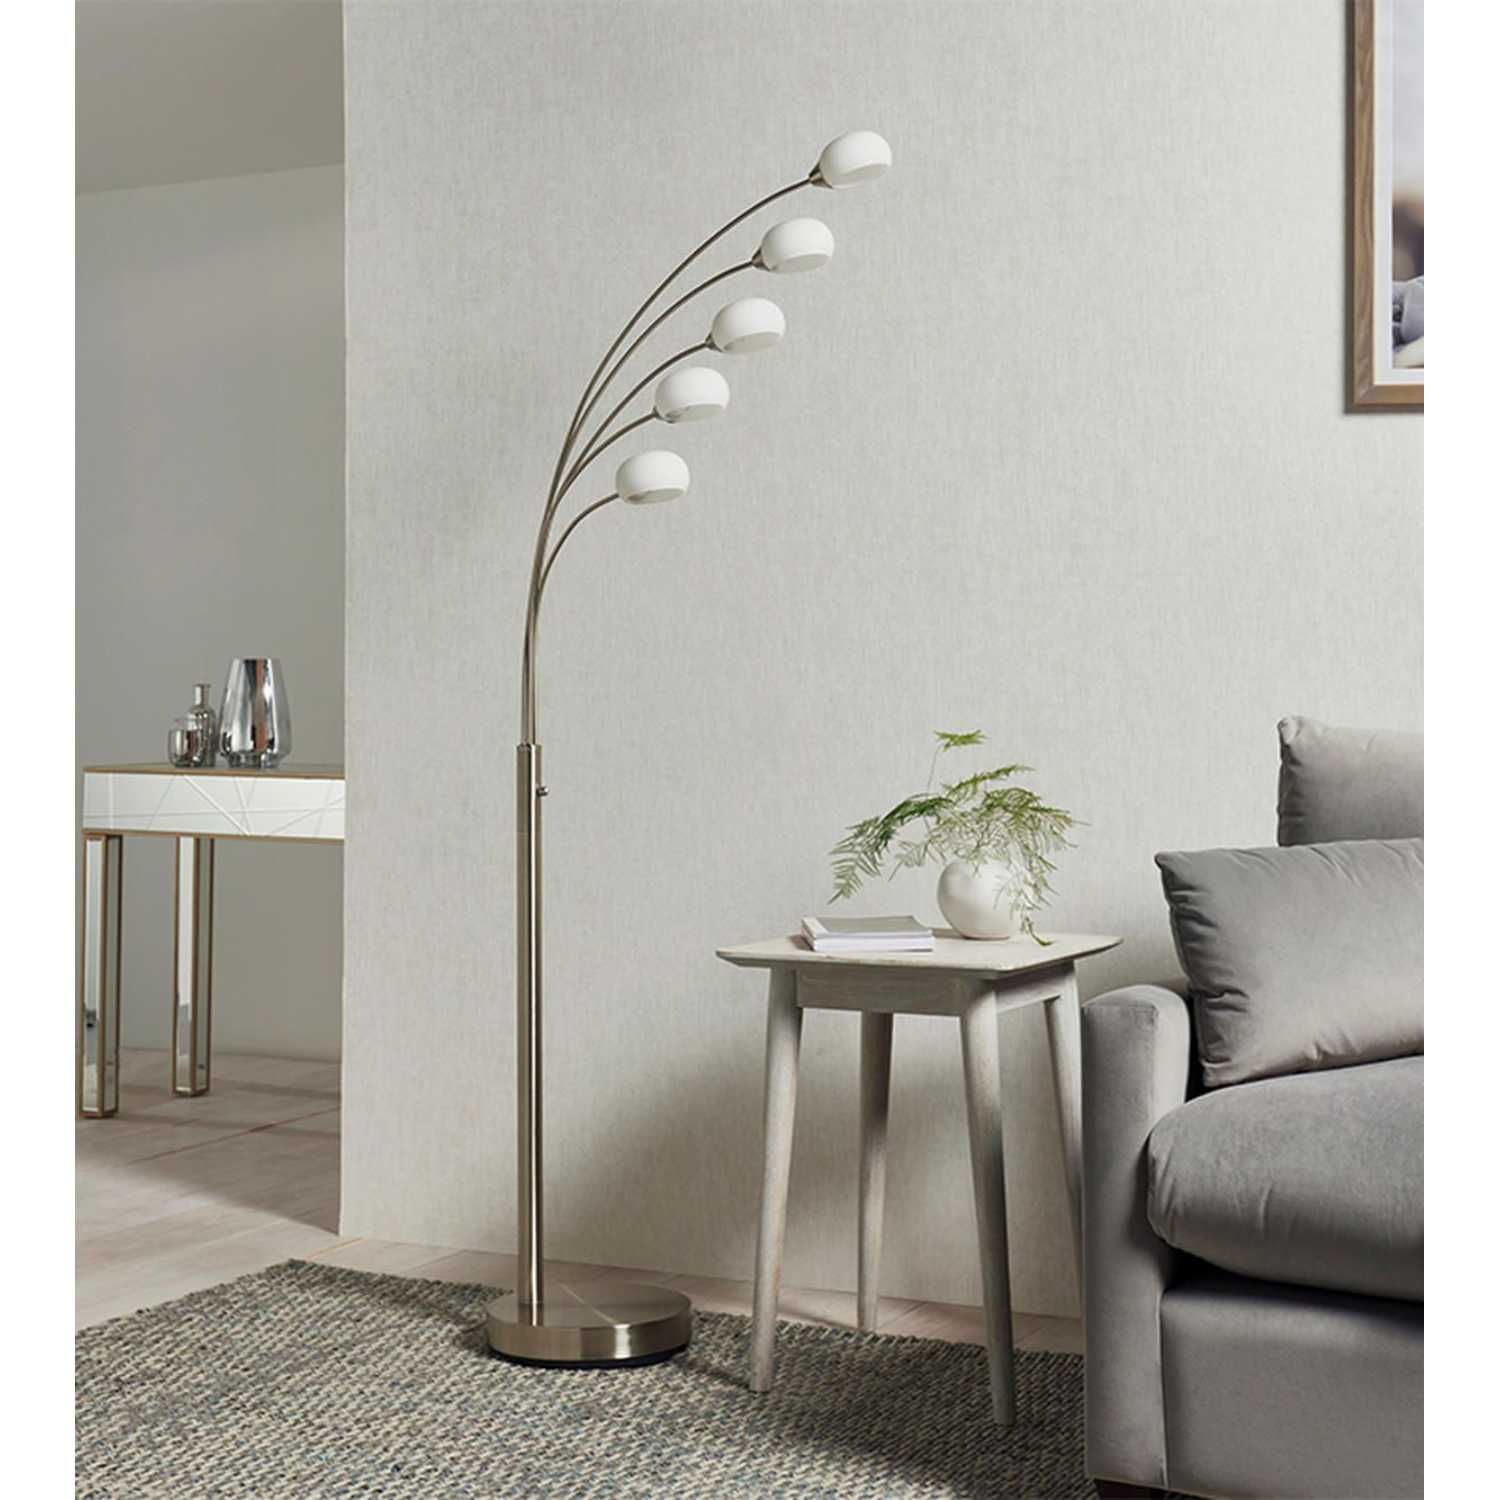 Vintage Silver Steel 5 Arm Dimmable Floor Lamp In Satin Nickel Finish With  White Glass – Cms Furniture With Regard To Glass Satin Nickel Floor Lamps (View 12 of 15)